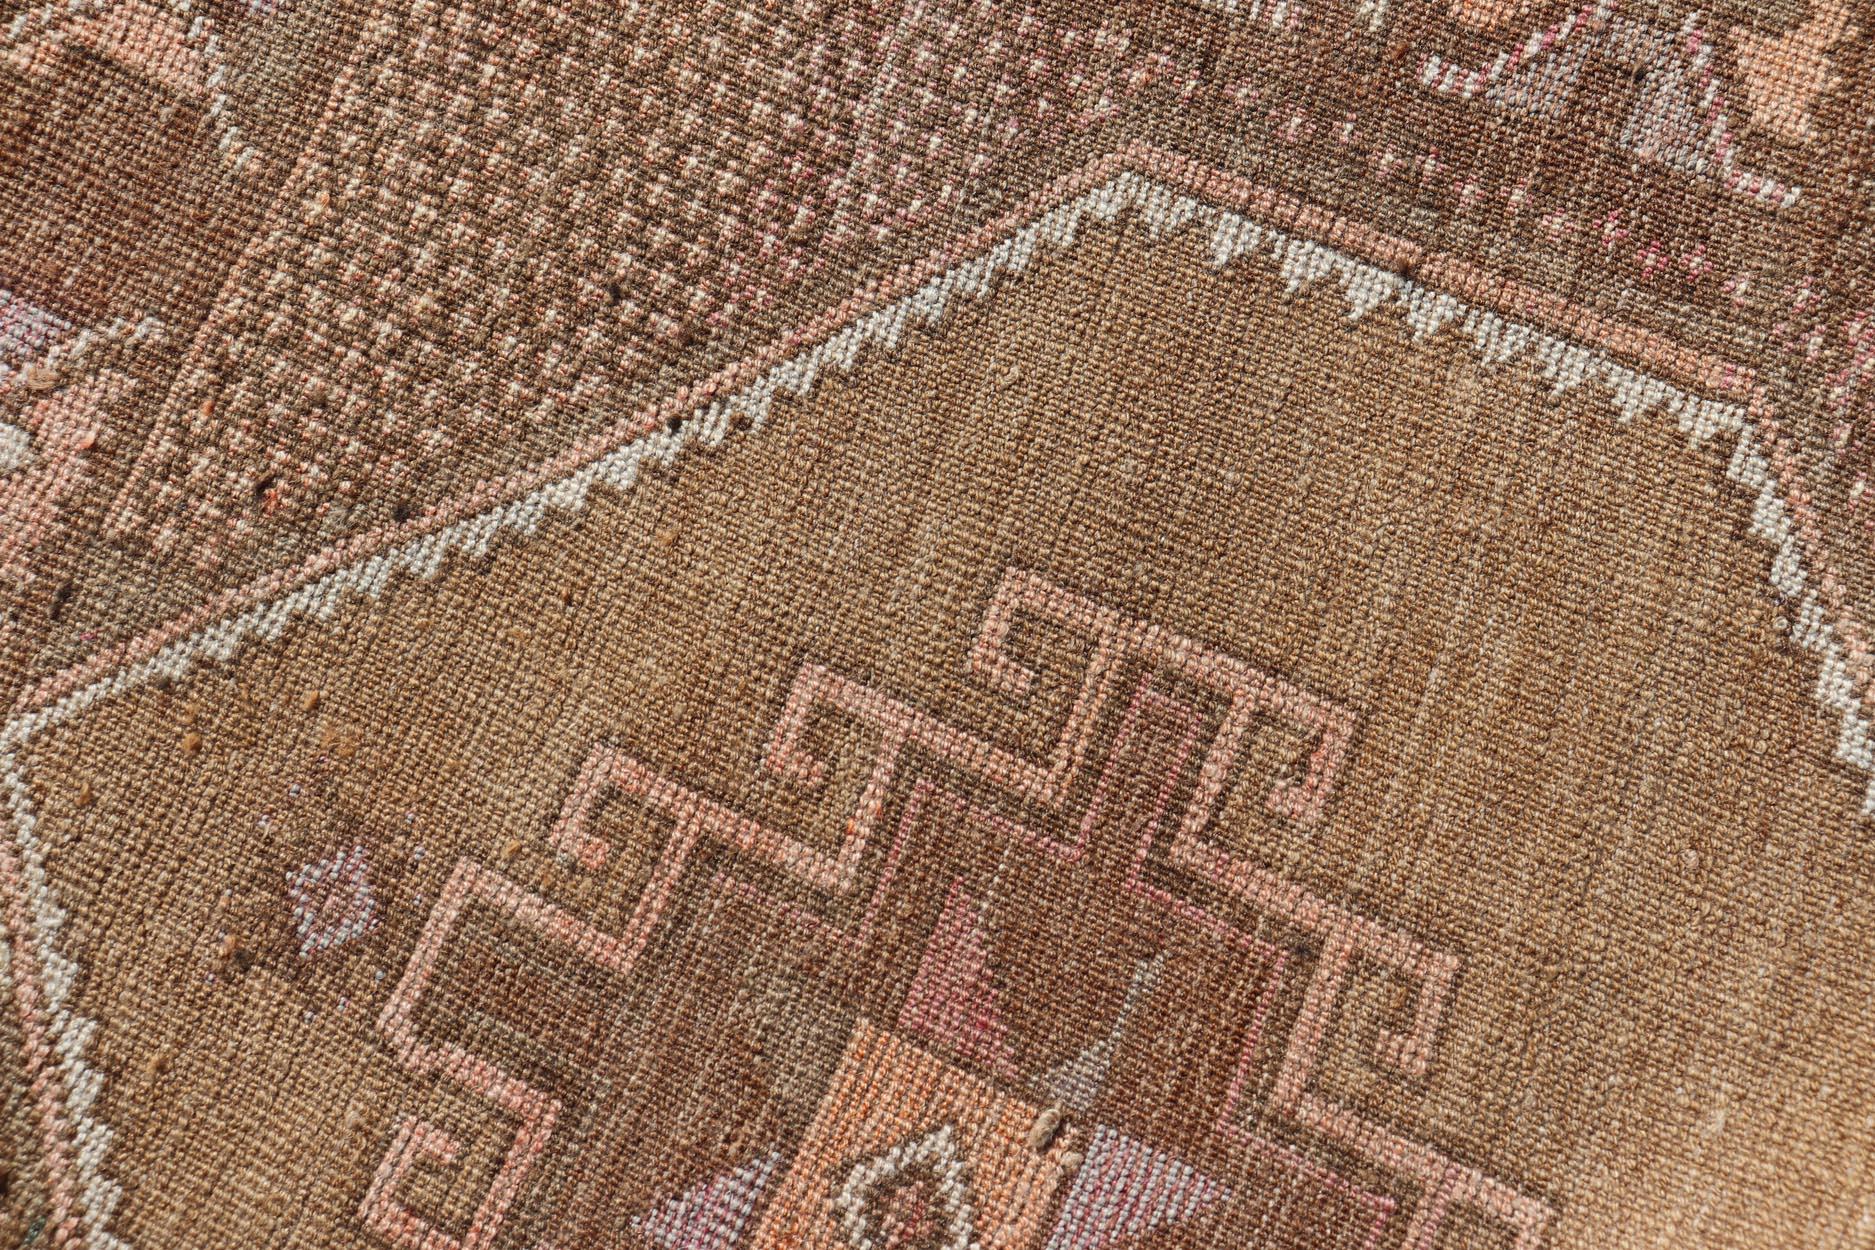 Unique & Colorful Turkish Kars Runner with Tribal Designs and Geometric Motifs For Sale 6